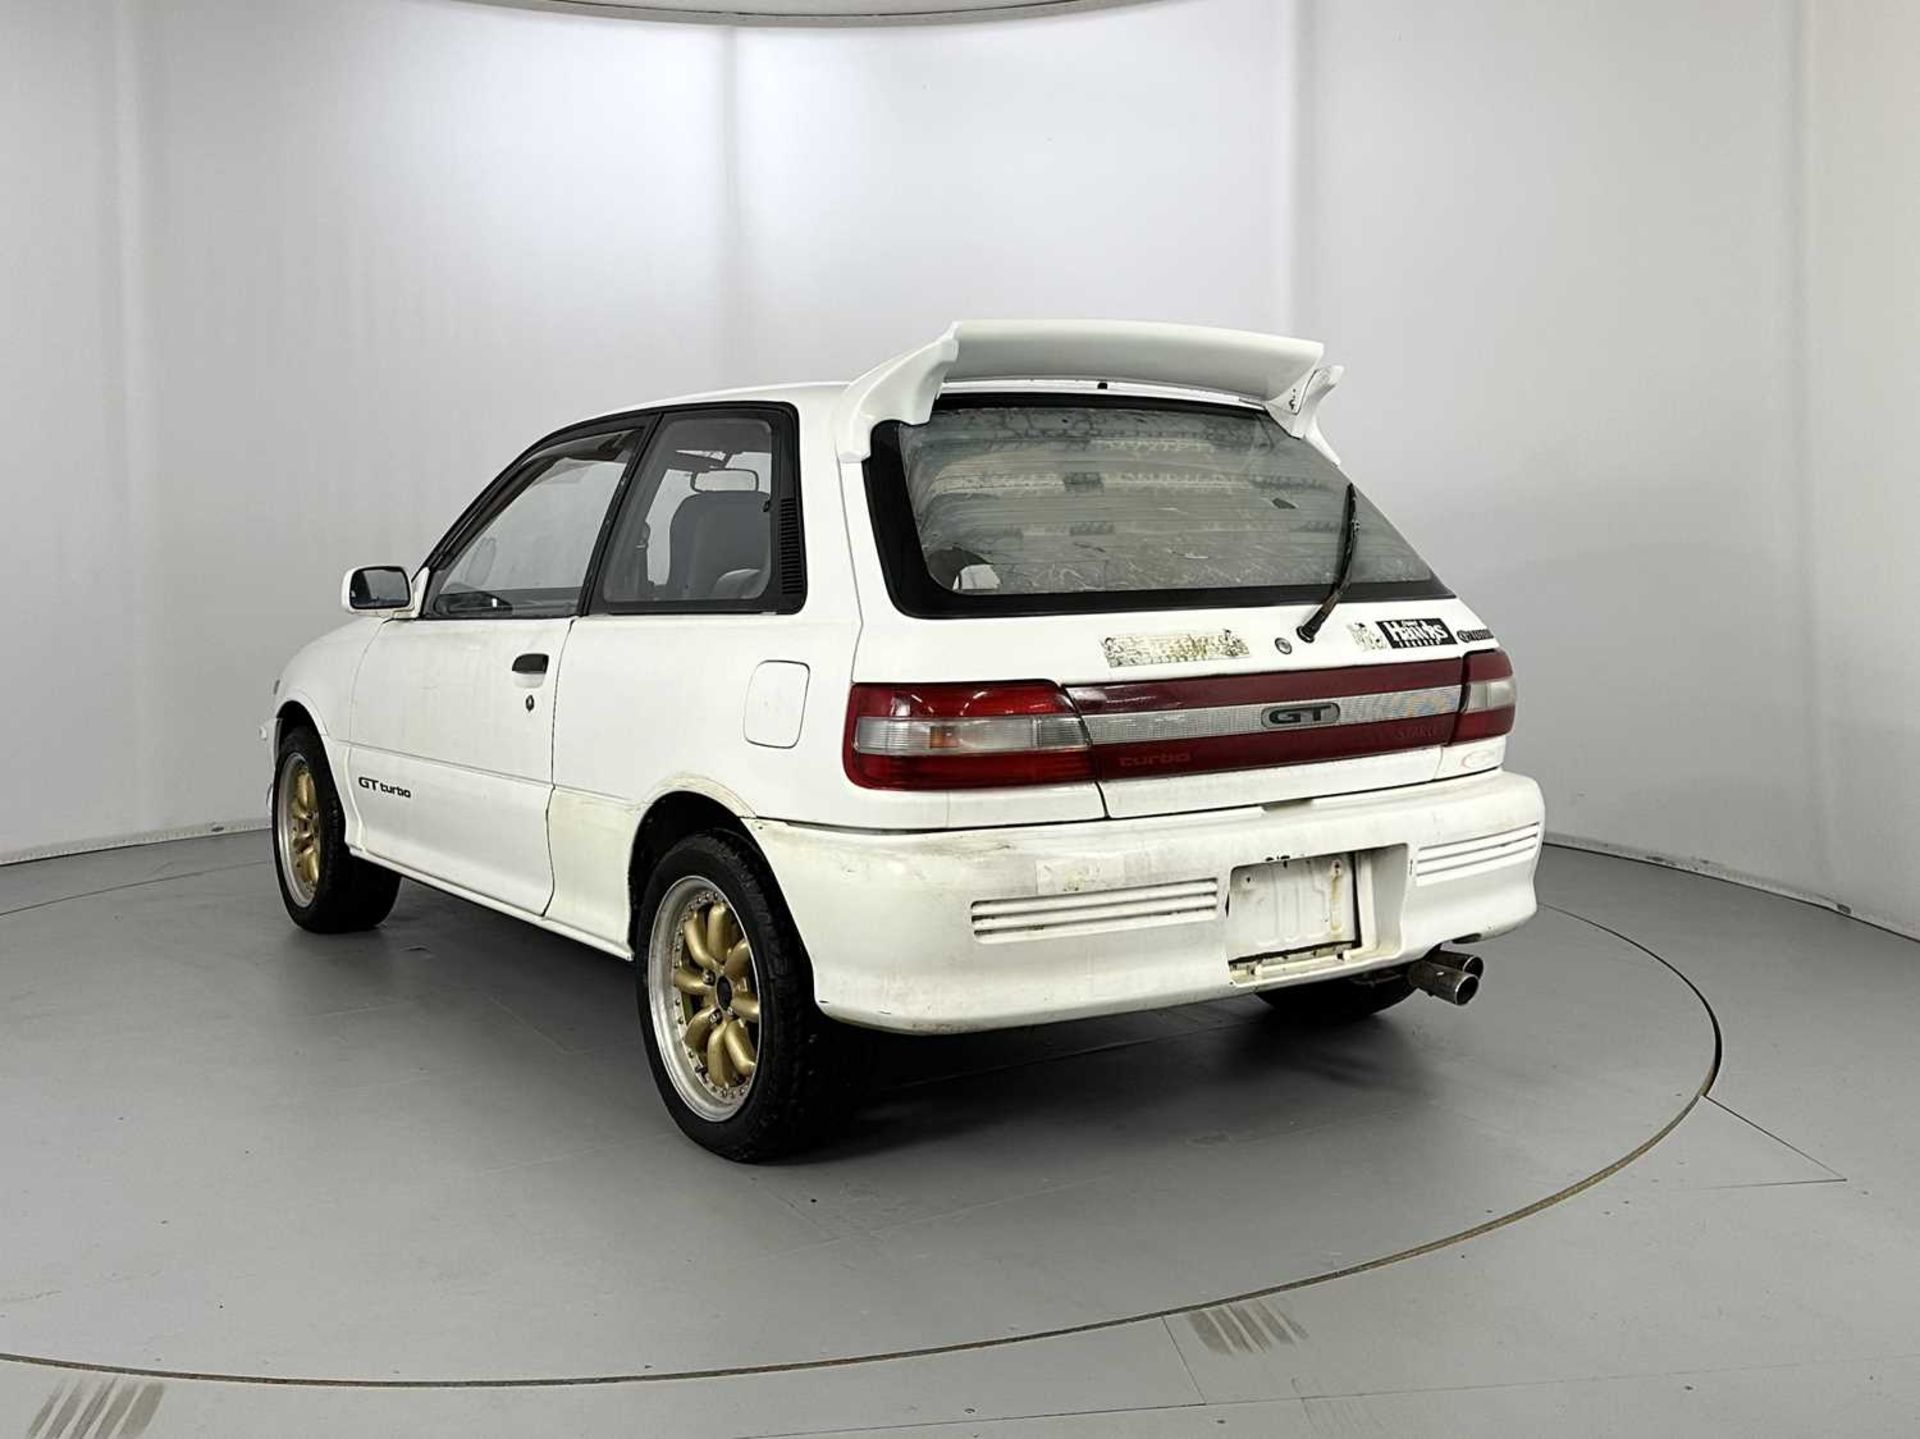 1990 Toyota Starlet GT Turbo - Image 7 of 29